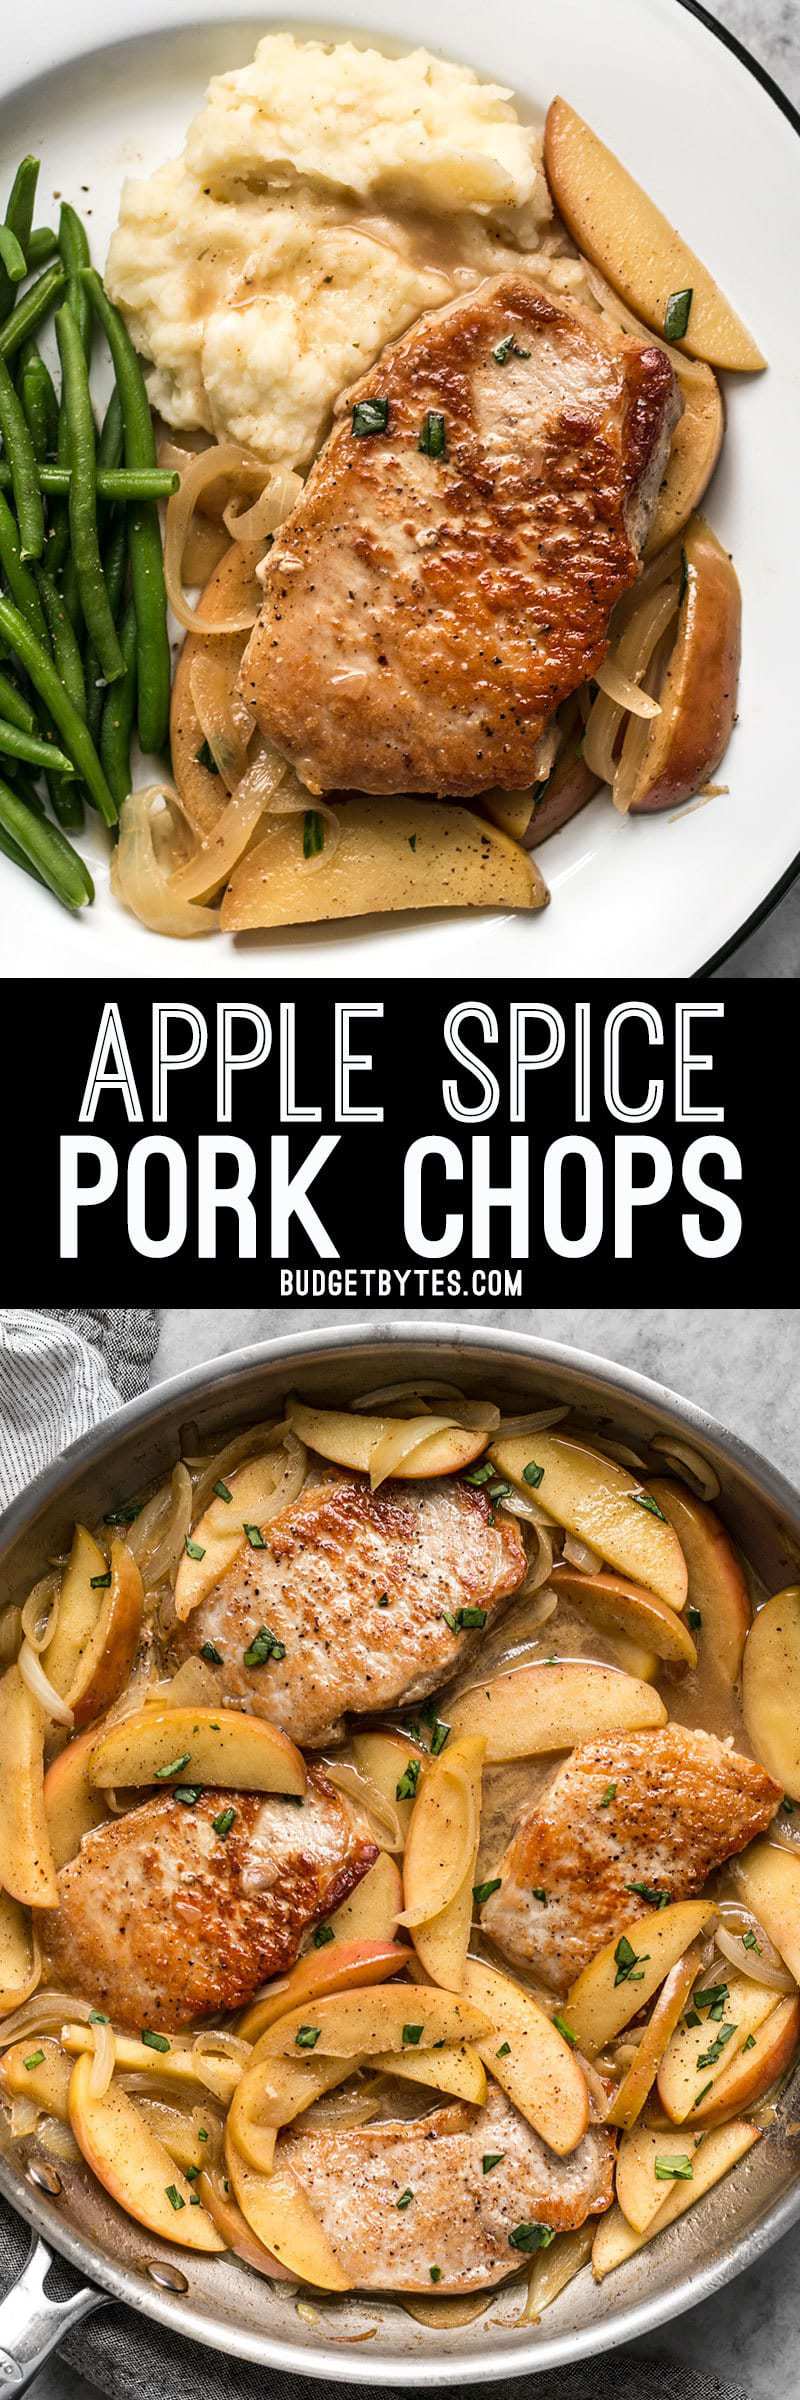 These Apple Spice Pork Chops are smothered with apples, onions, cinnamon, and butter which make a rich, flavorful, sweet, and savory main dish. BudgetBytes.com